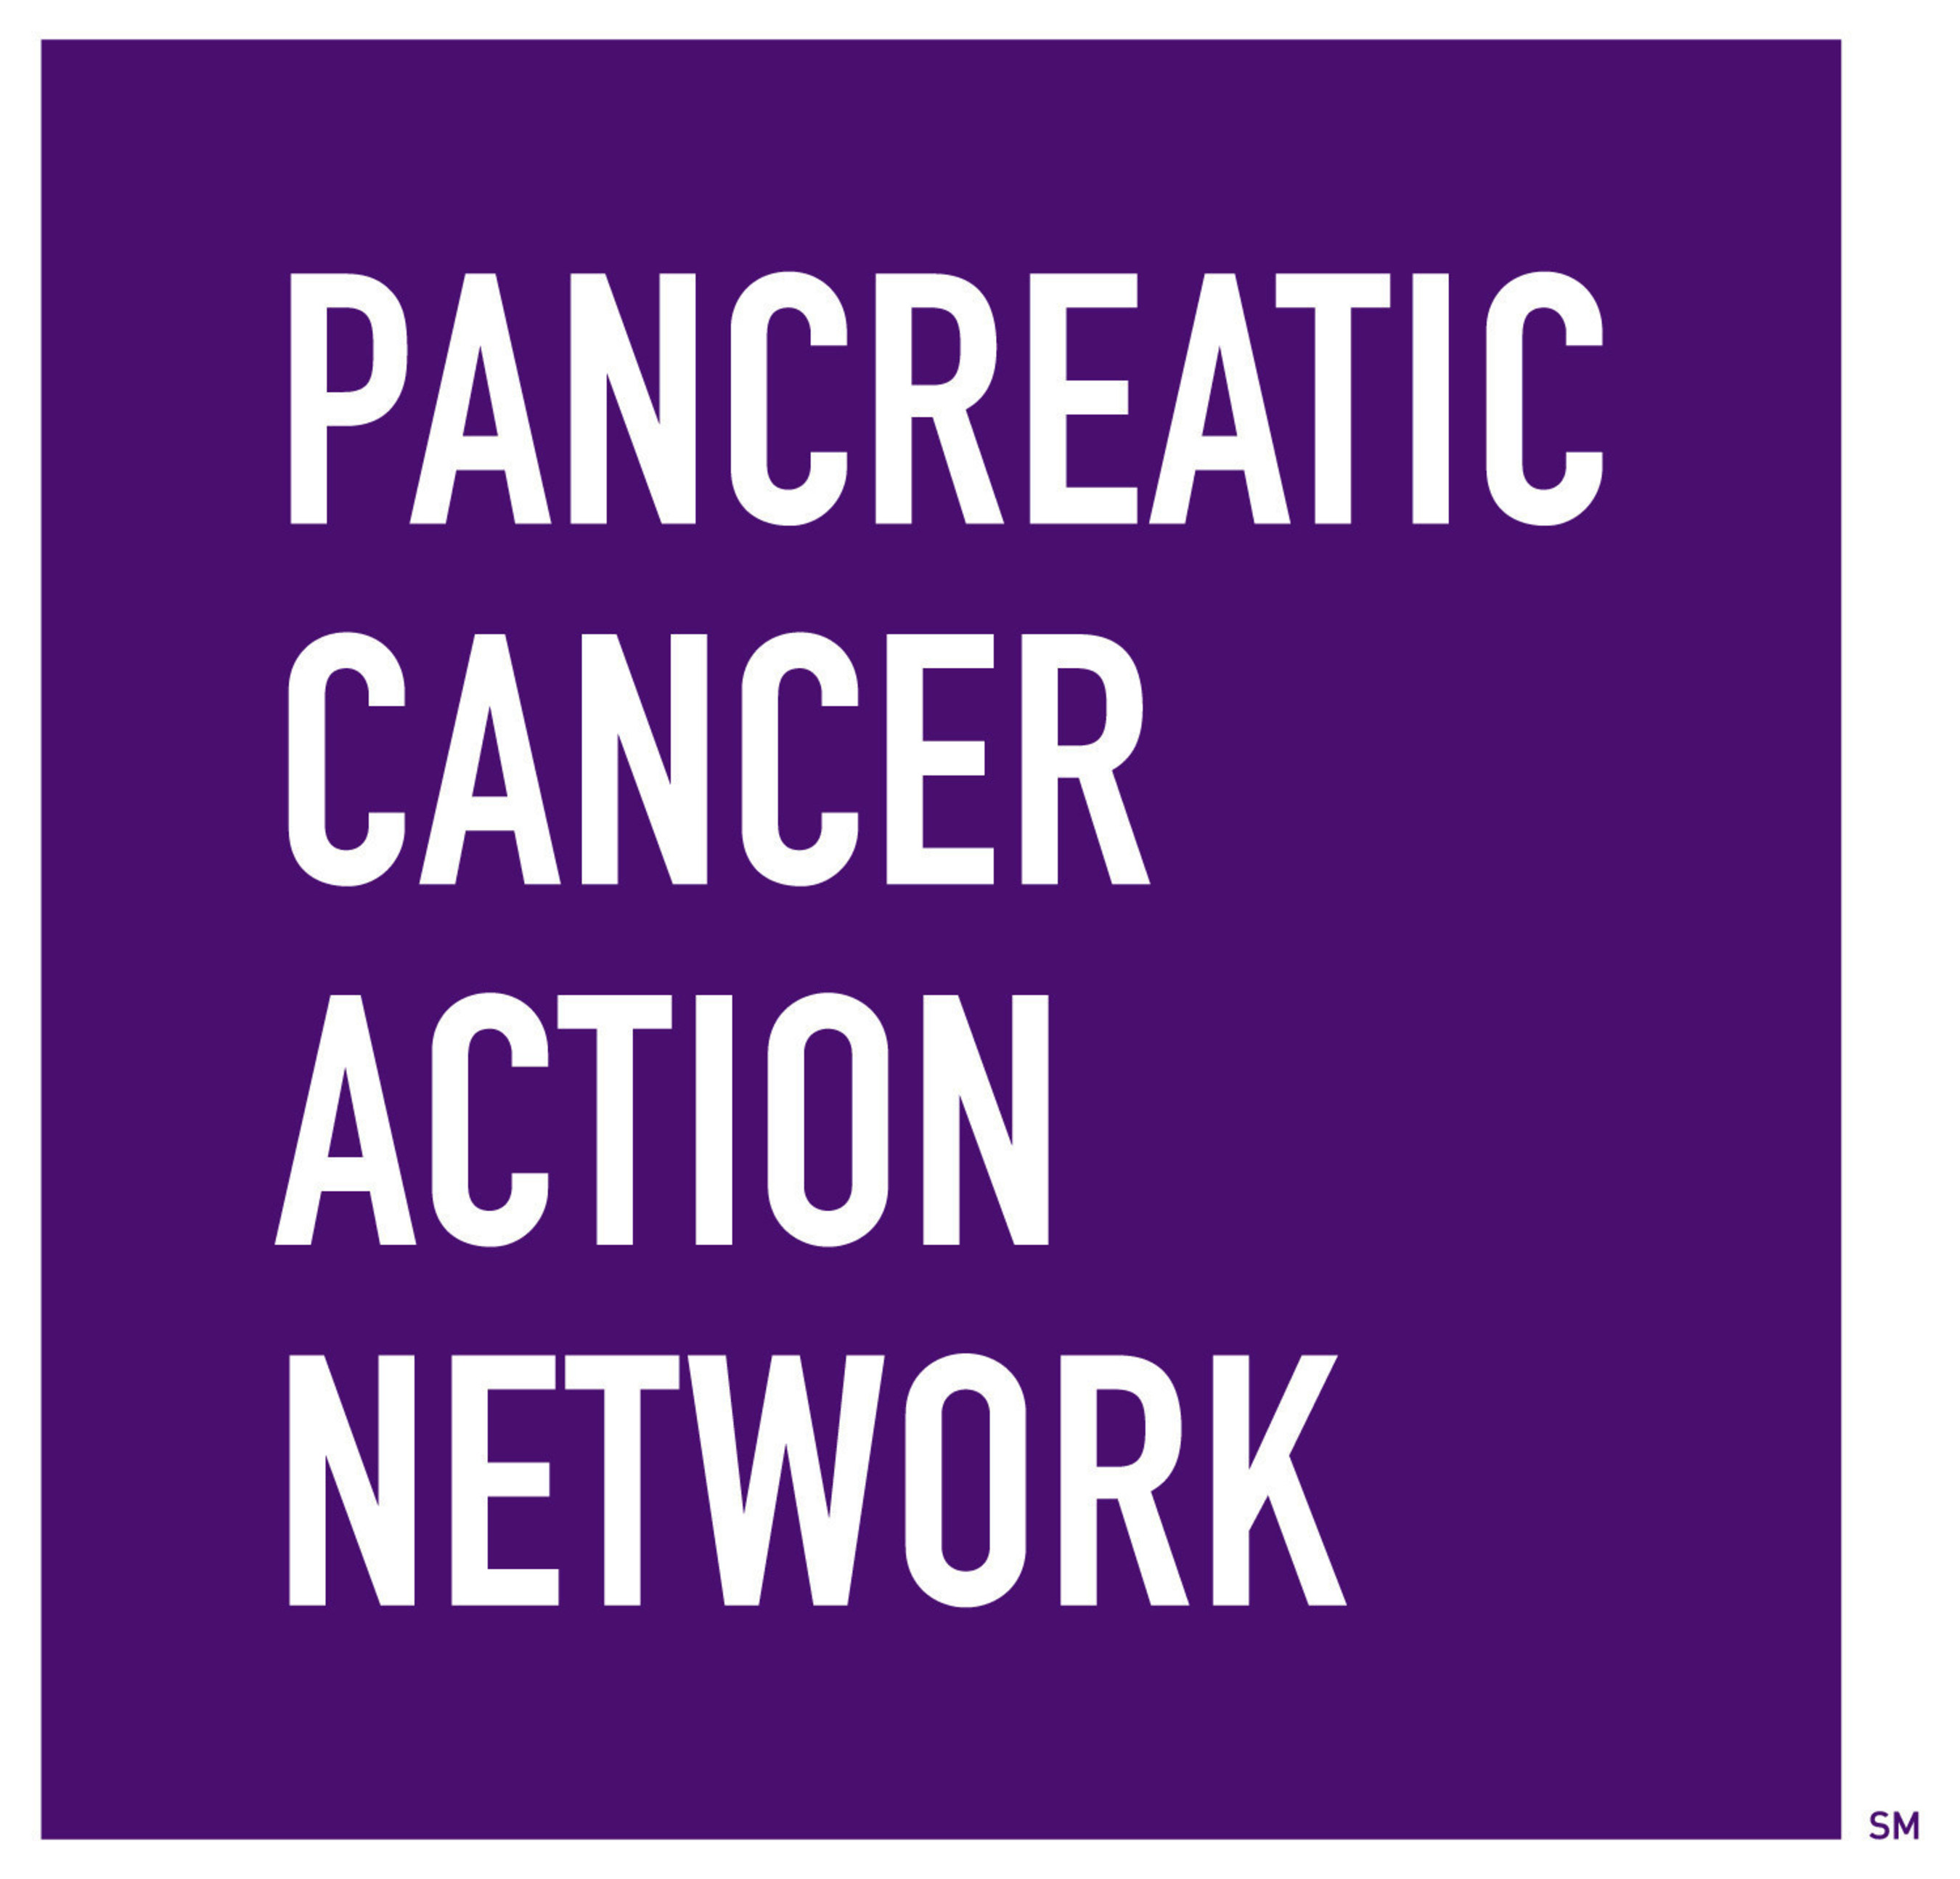 The Pancreatic Cancer Action Network is the national organization working to advance research, support patients and create hope for those affected by pancreatic cancer. To learn more about the Clinical Trial Finder, please visit clinicaltrials.pancan.org or call 877-272-6226 to speak with a Patient Central Associate.